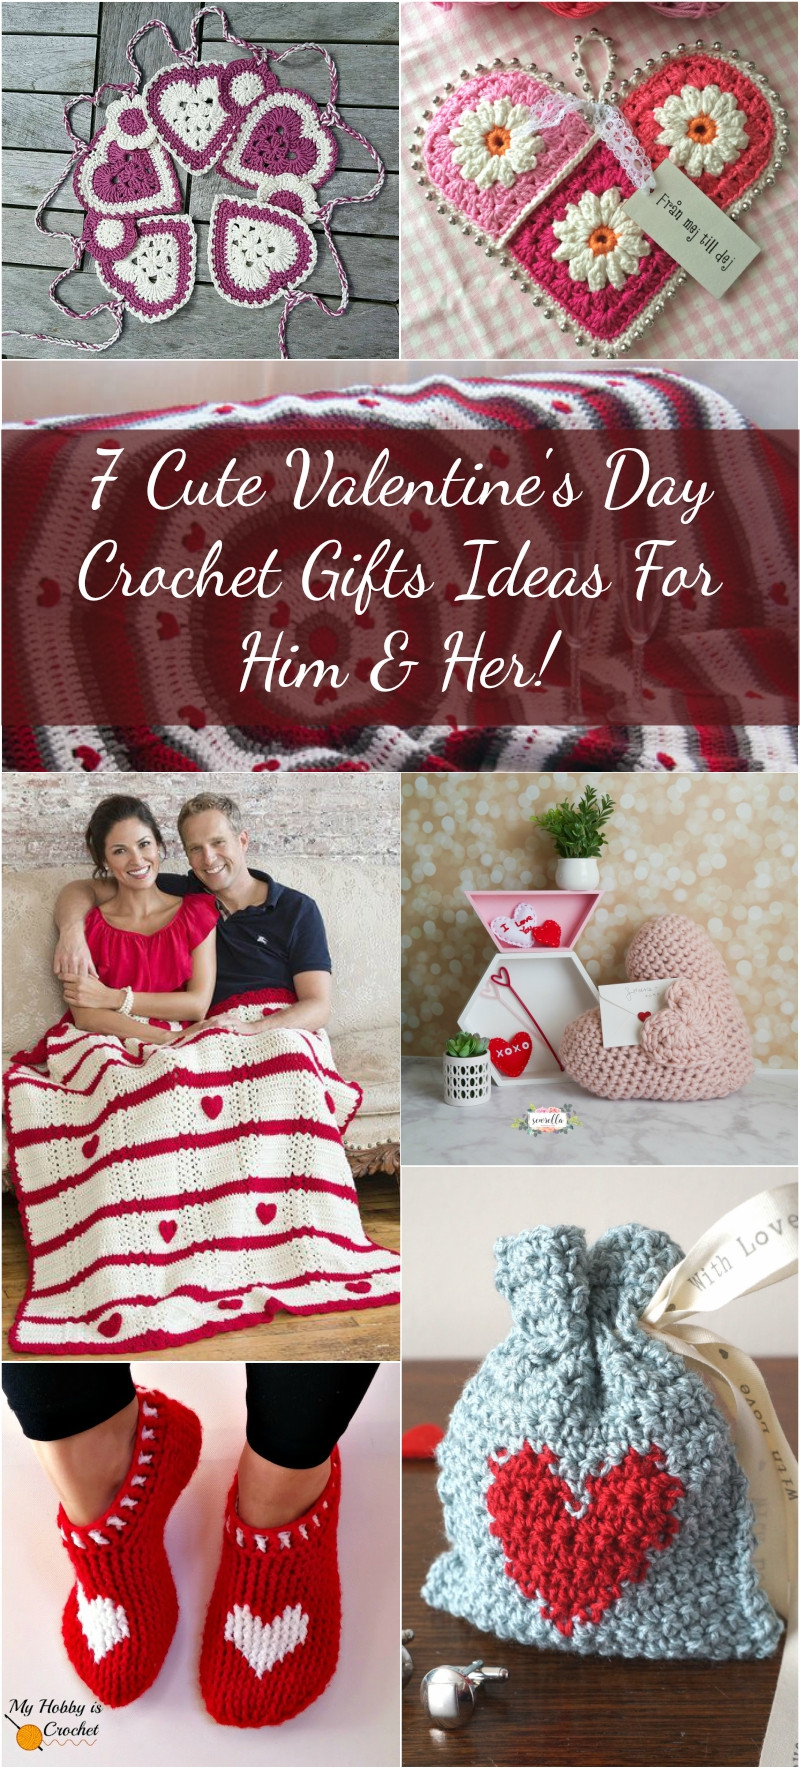 New Relationship Valentines Gift Ideas
 7 Cute Valentine s Day Crochet Gifts Ideas For Him & Her